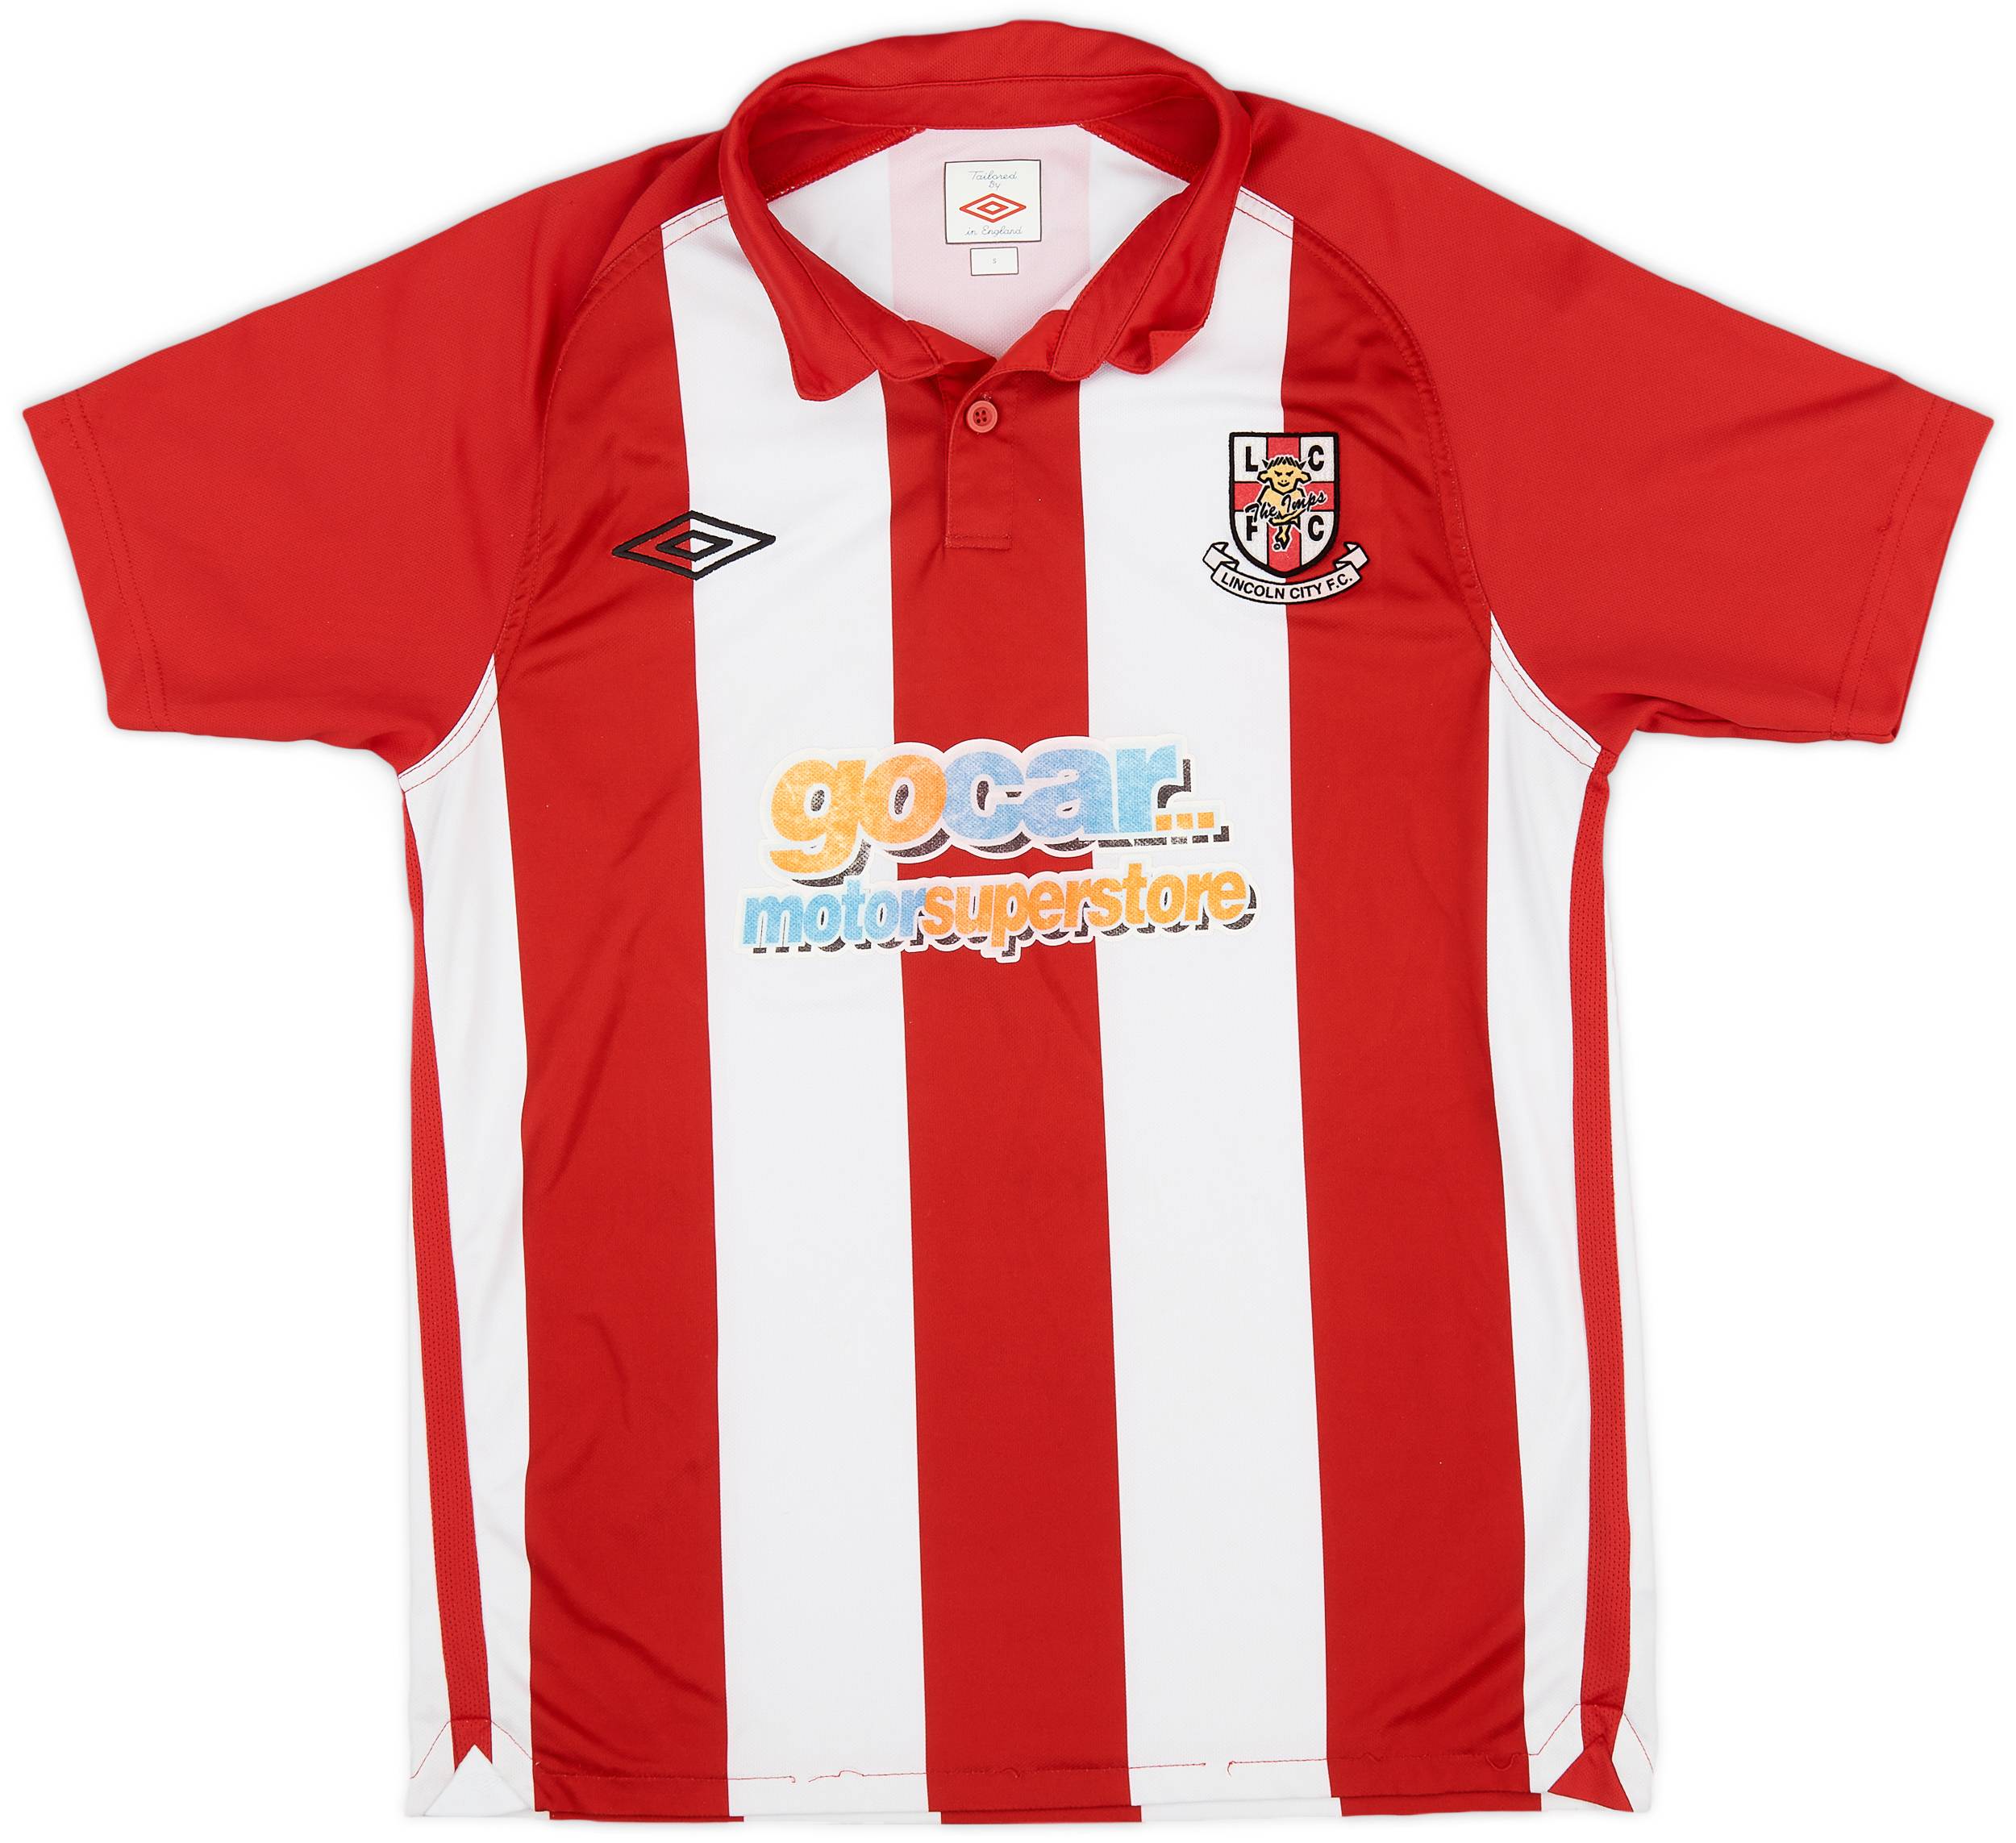 2010-11 Lincoln City Home Shirt - 6/10 - (S)